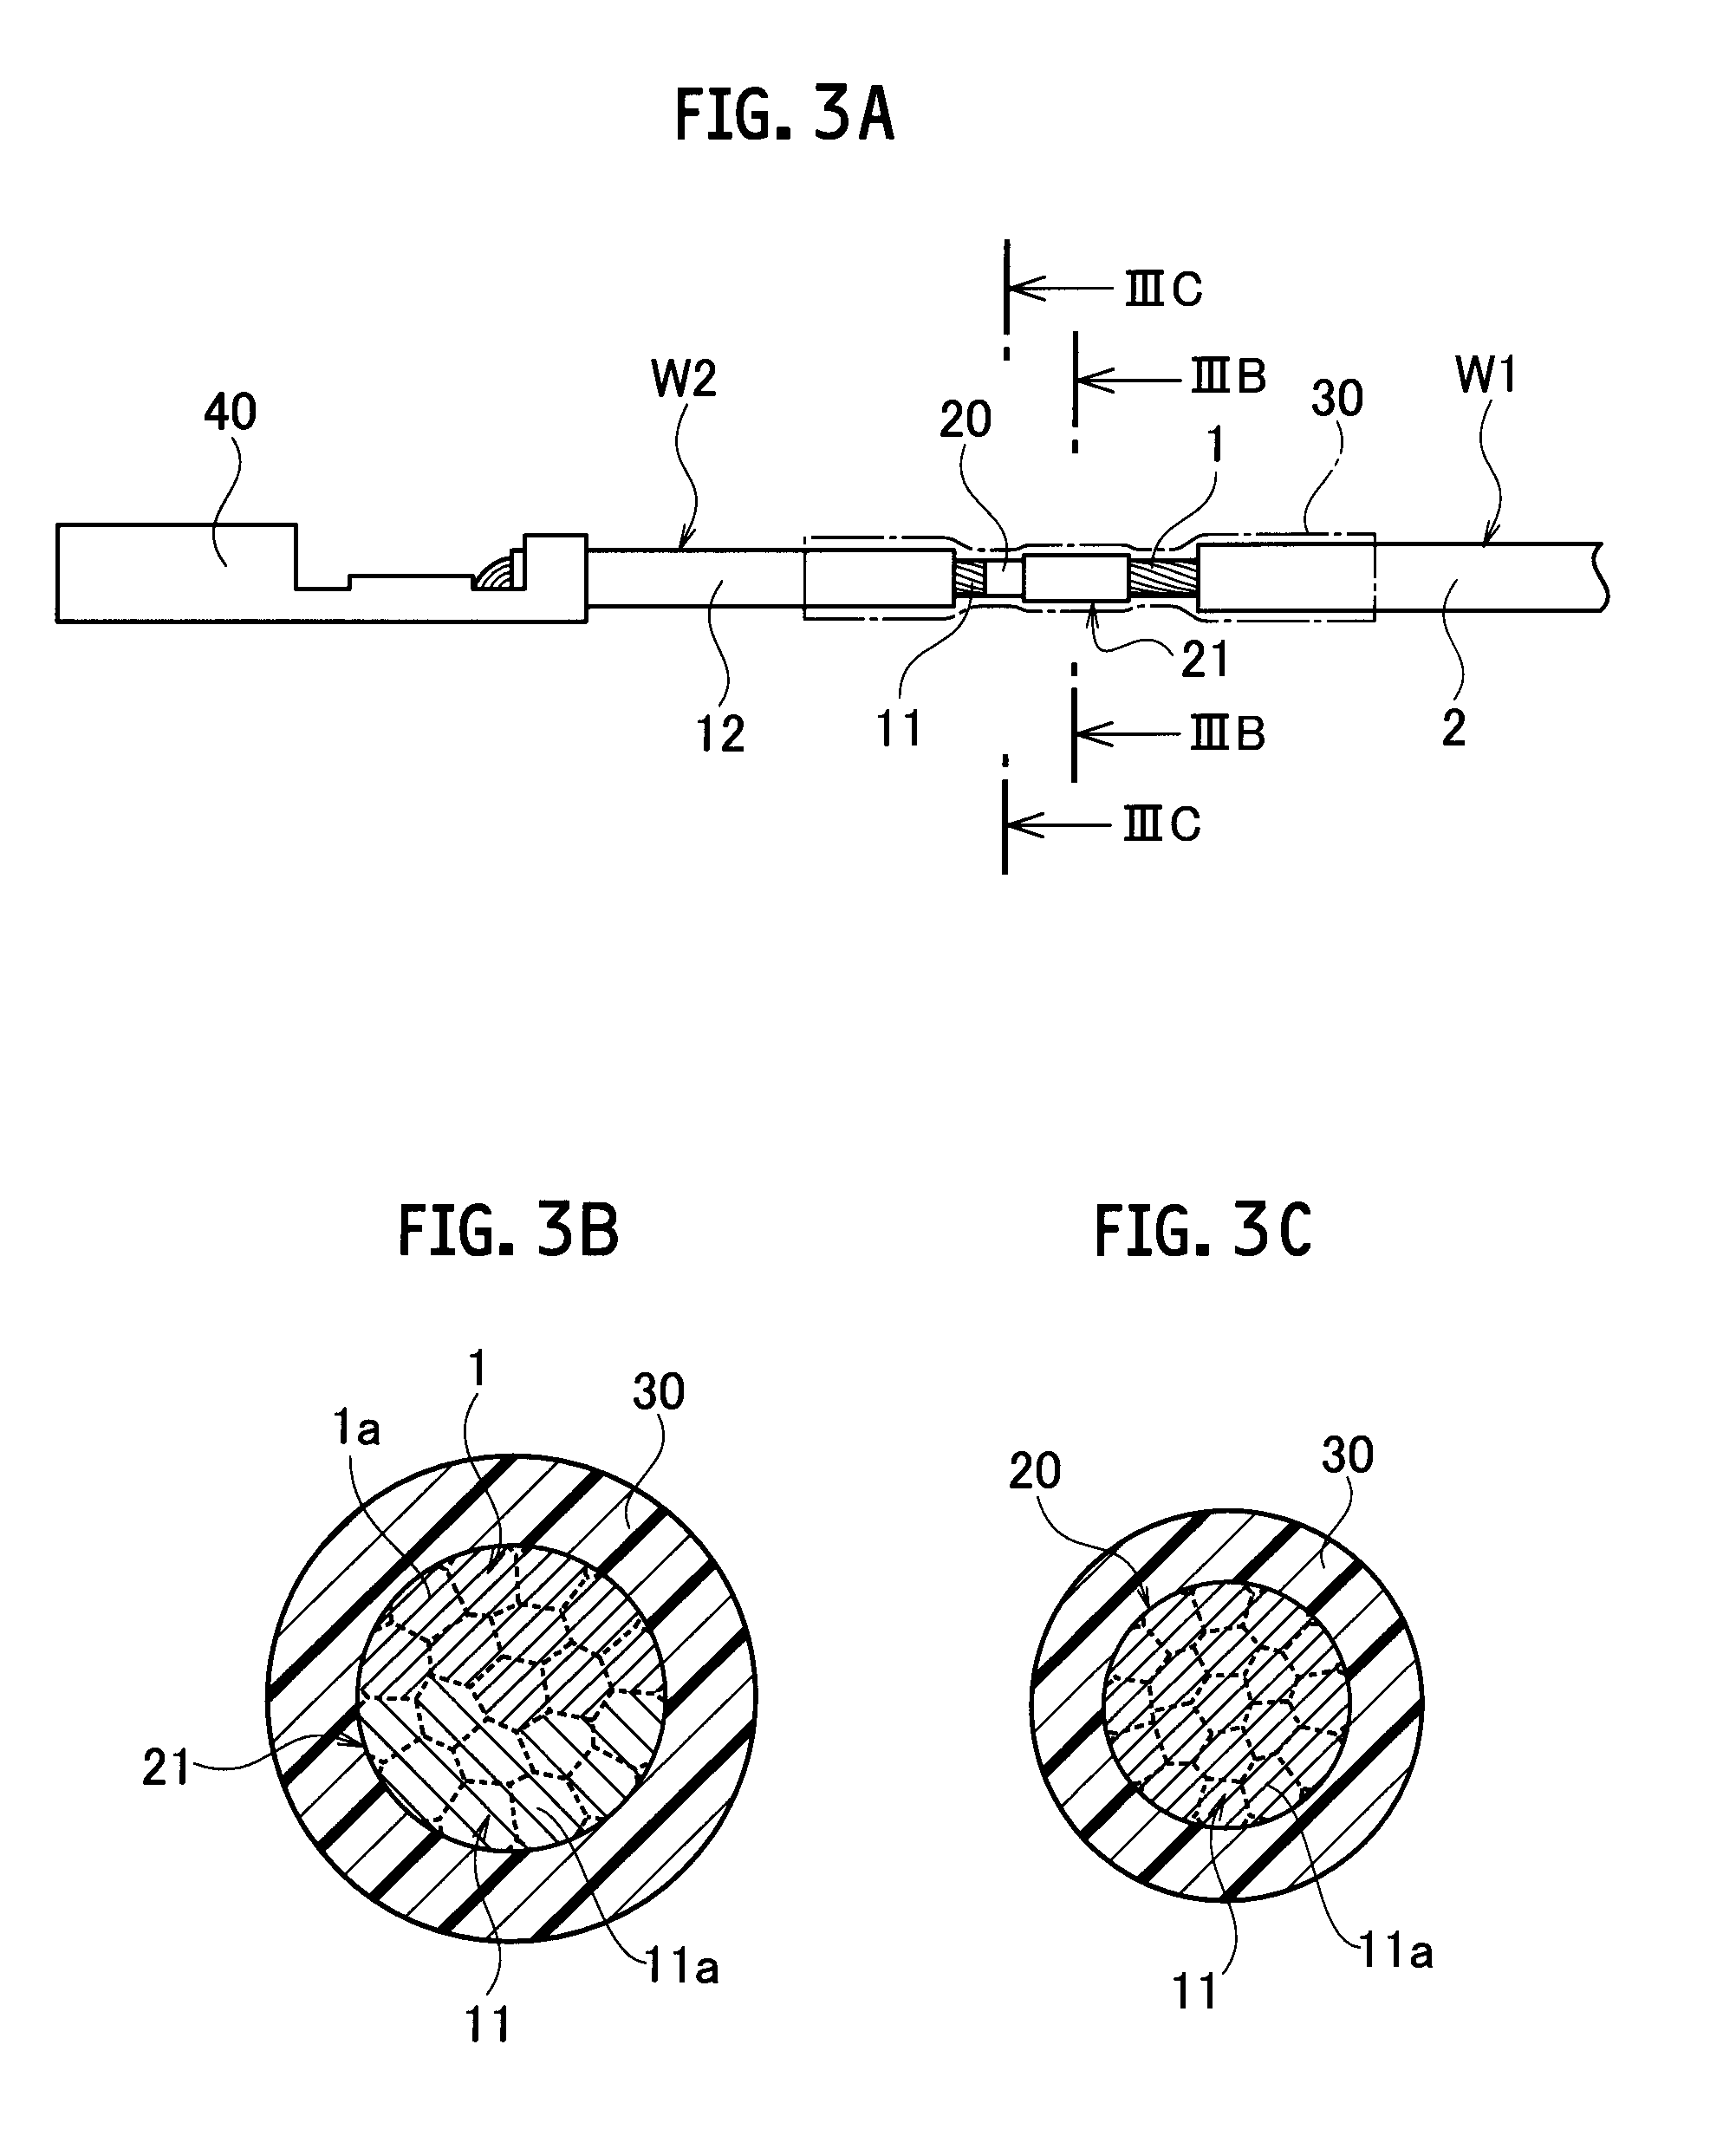 Inter-wire connection structure and method for manufacturing the same